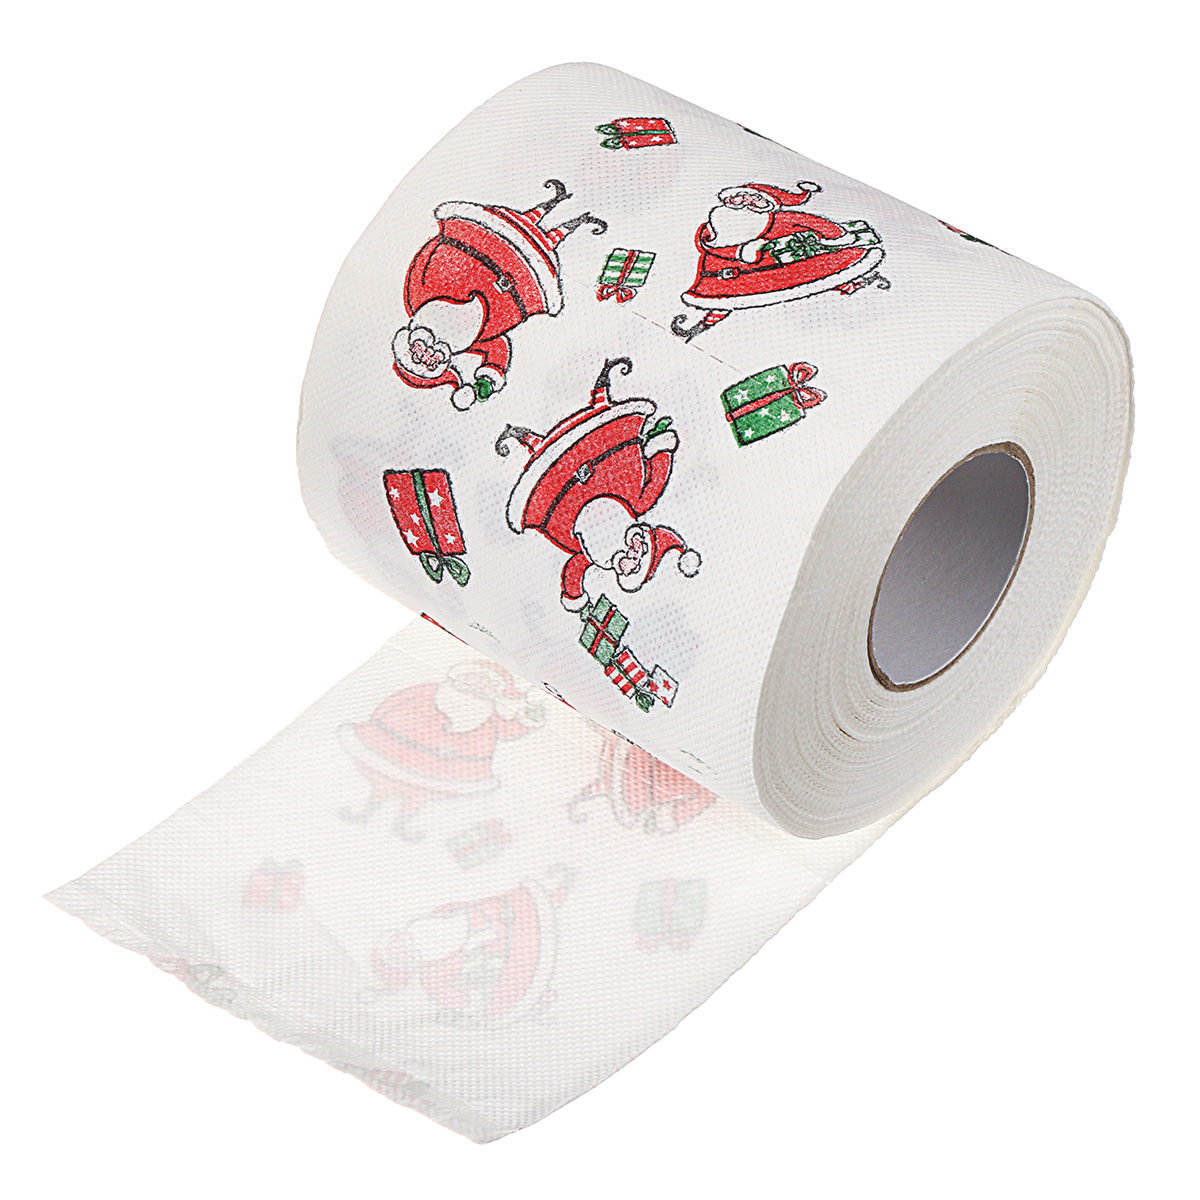 

Santa Claus Printed Merry Christmas Toilet Paper Tissue Table Room Decor Ornament Crafts Decorations